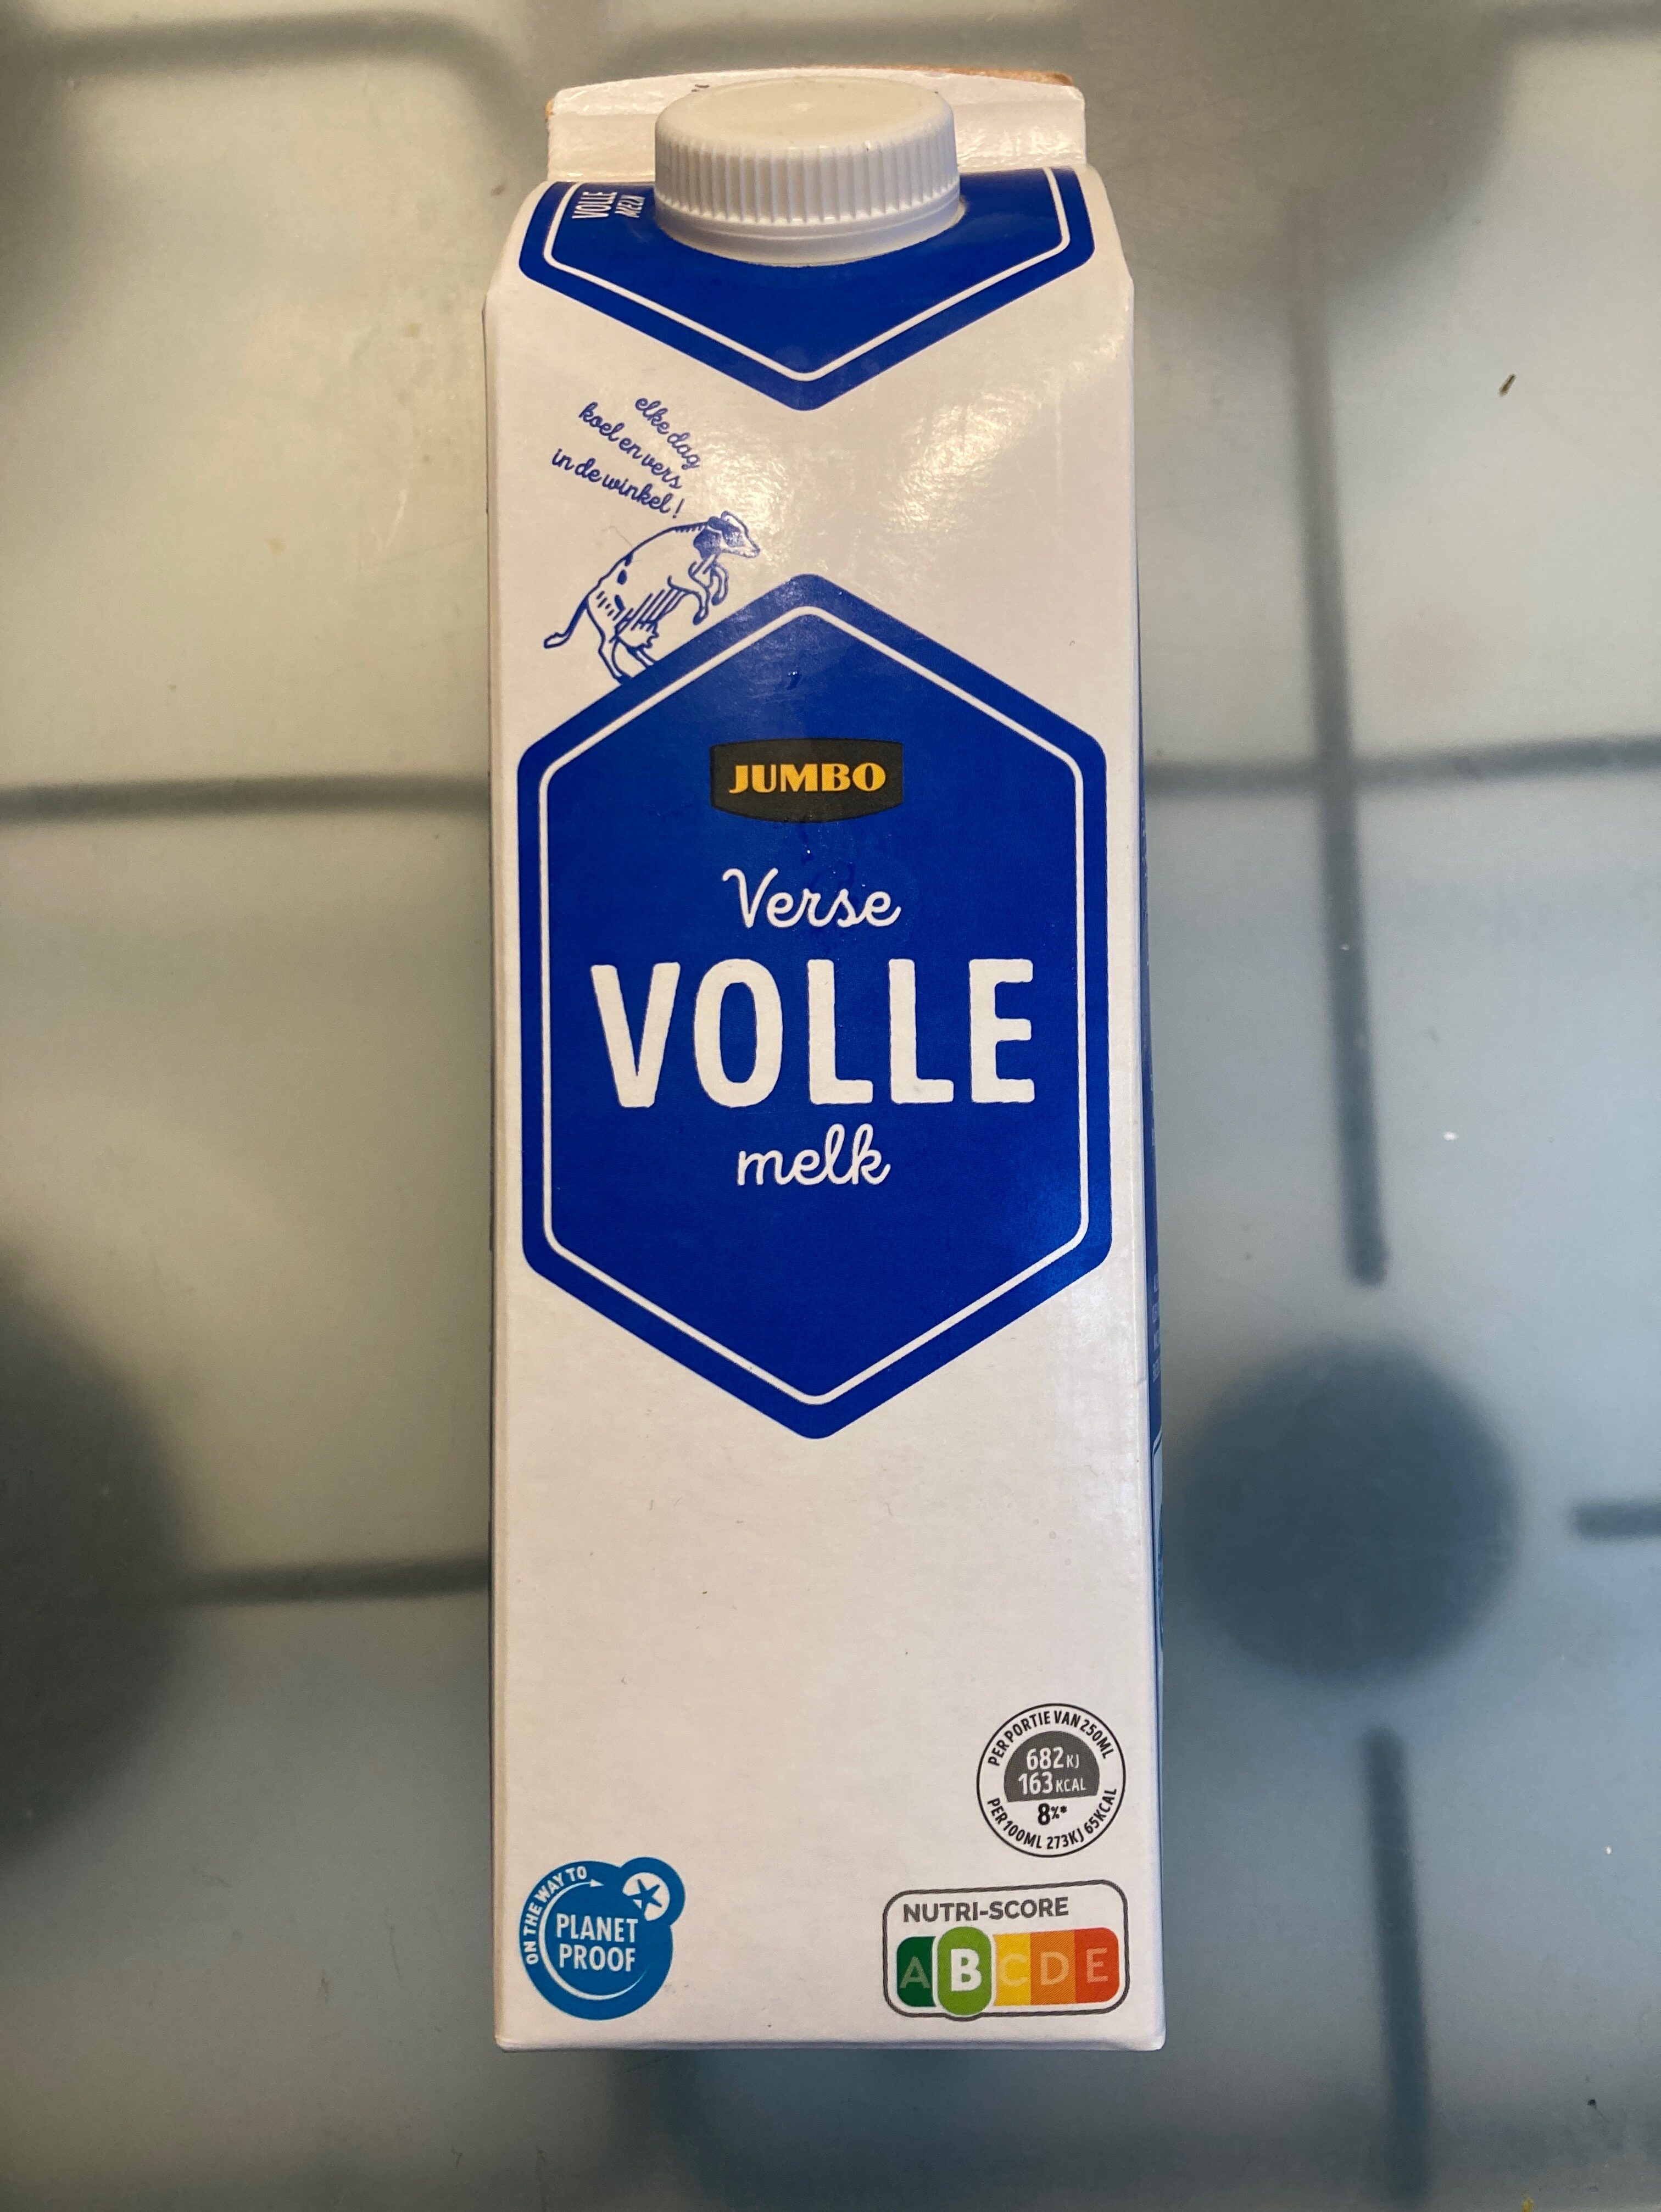 Volle melk - Product